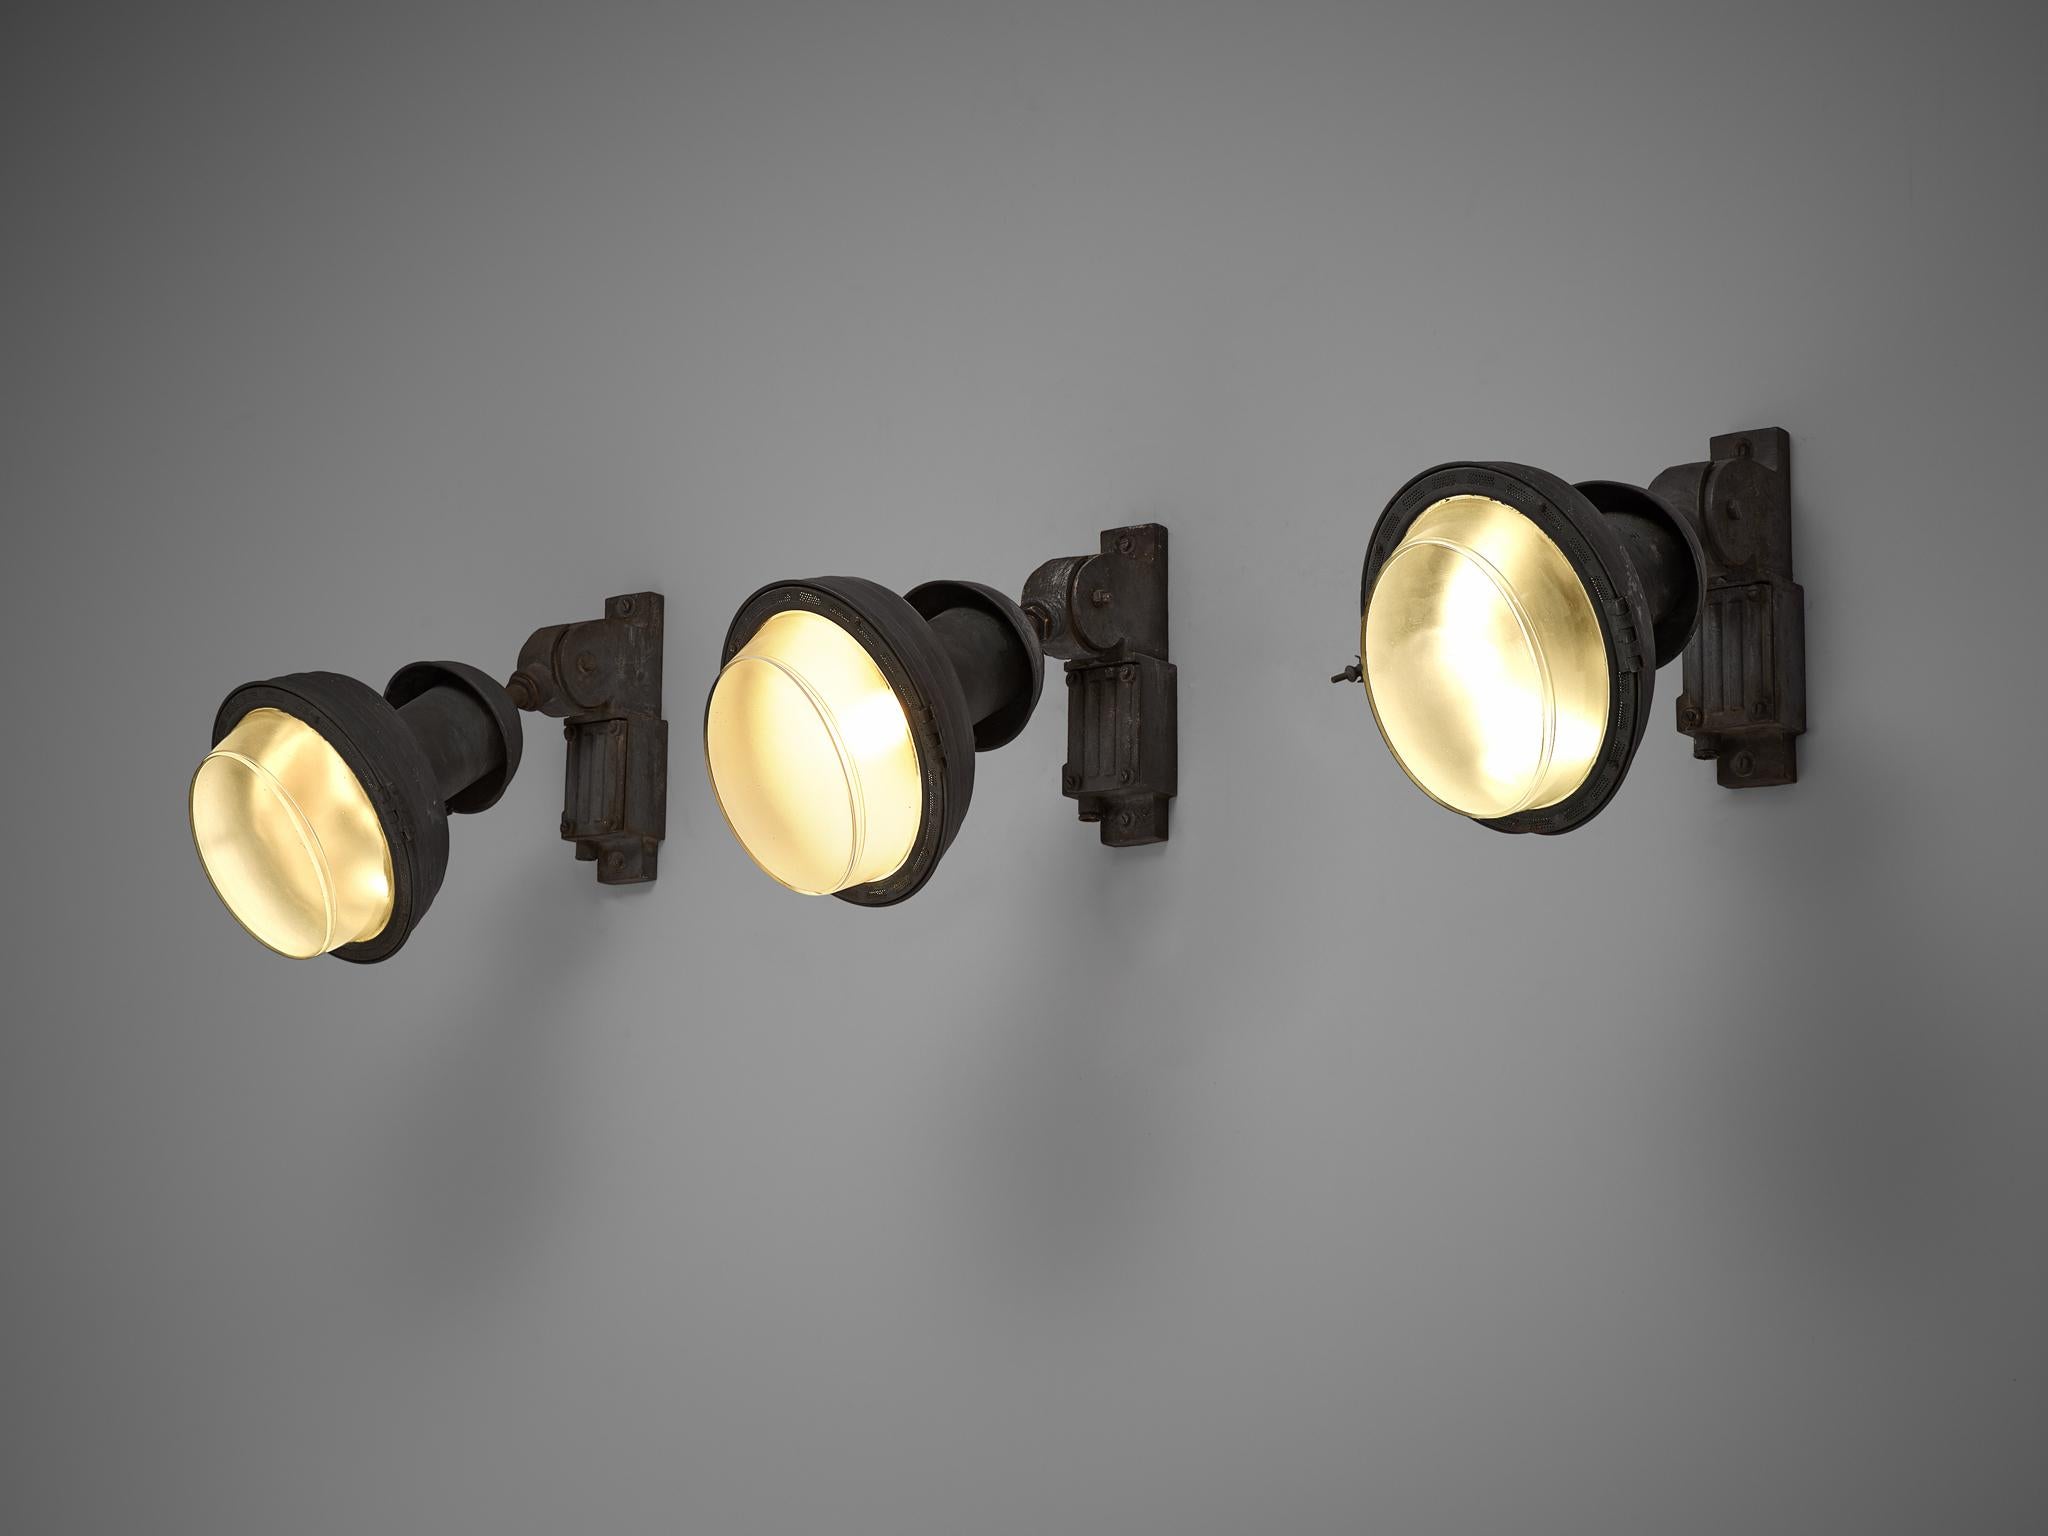 Set of industrial wall lamps, Europe, 1950s.

Heavy industrial wall lamps in metal. The lamps are made with several rounded elements, with a tapered shade in structured glass. The light shining through the shades is diffuse and soft. The heavy,